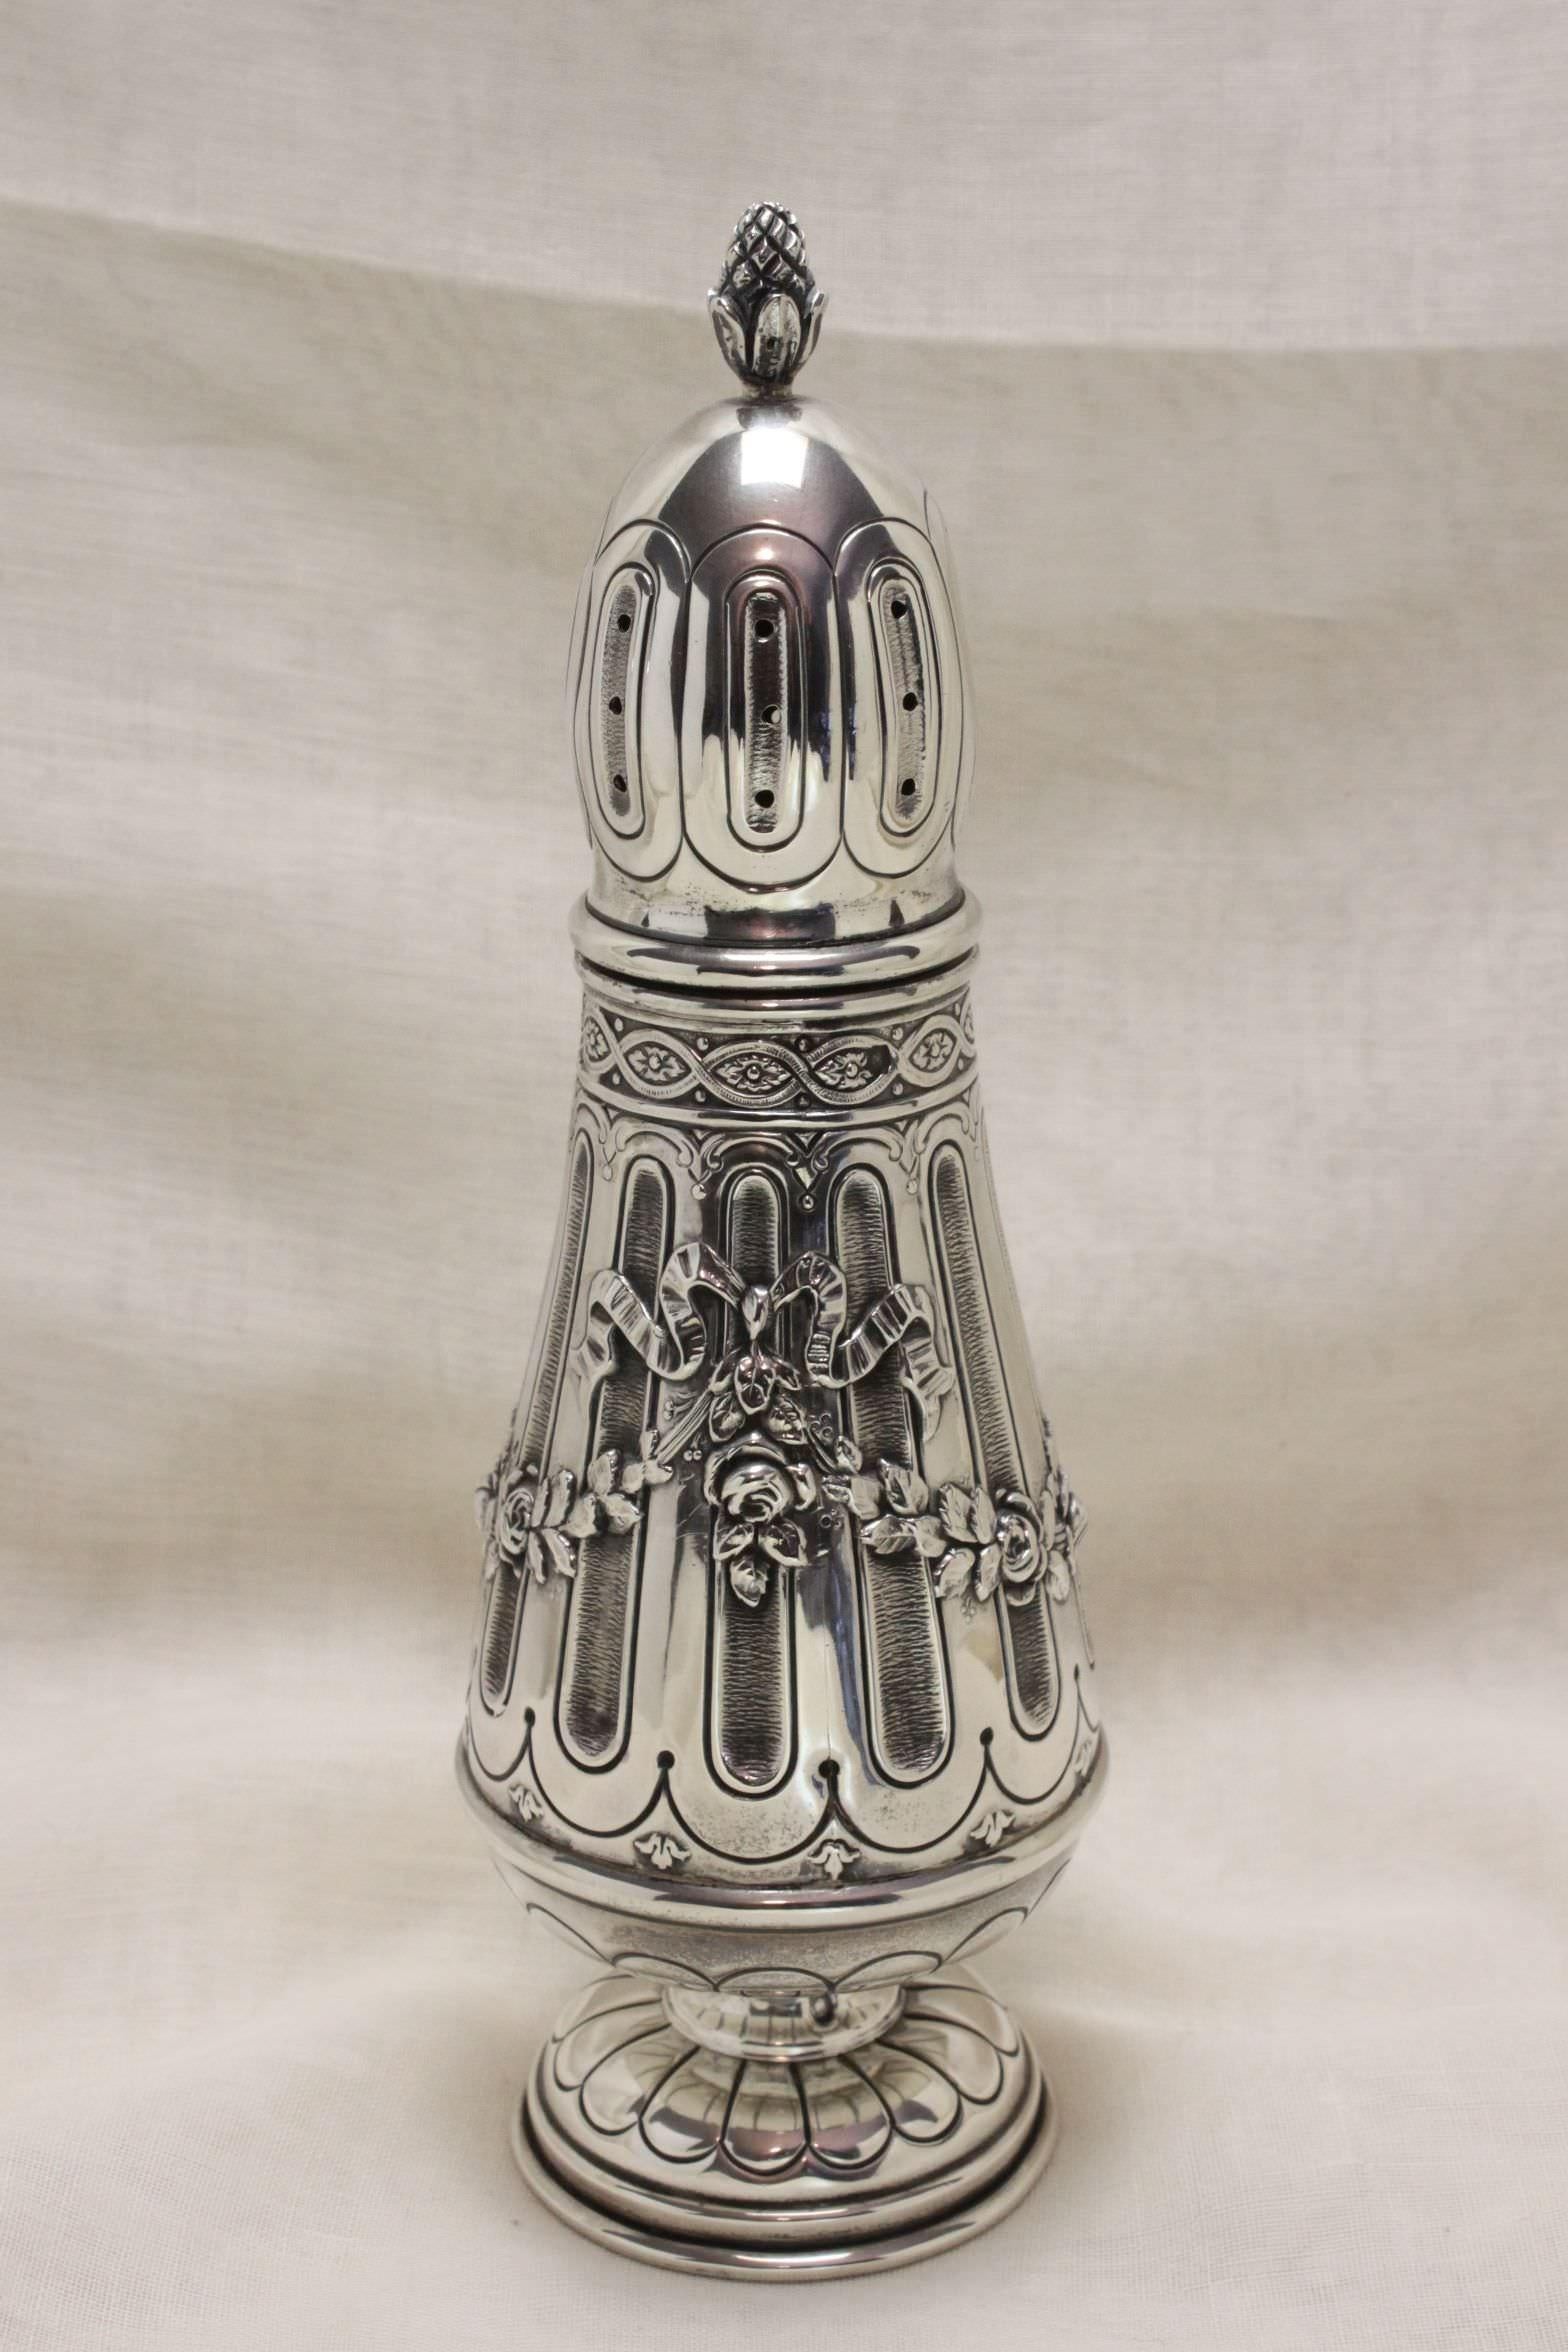 The fluted body of this very pretty sugar caster is decorated with embossed ribbons and swags of roses and stands on an embossed circular foot. The domed lid also features fluting and is topped with a pineapple. The French stamped mark of Minerva's